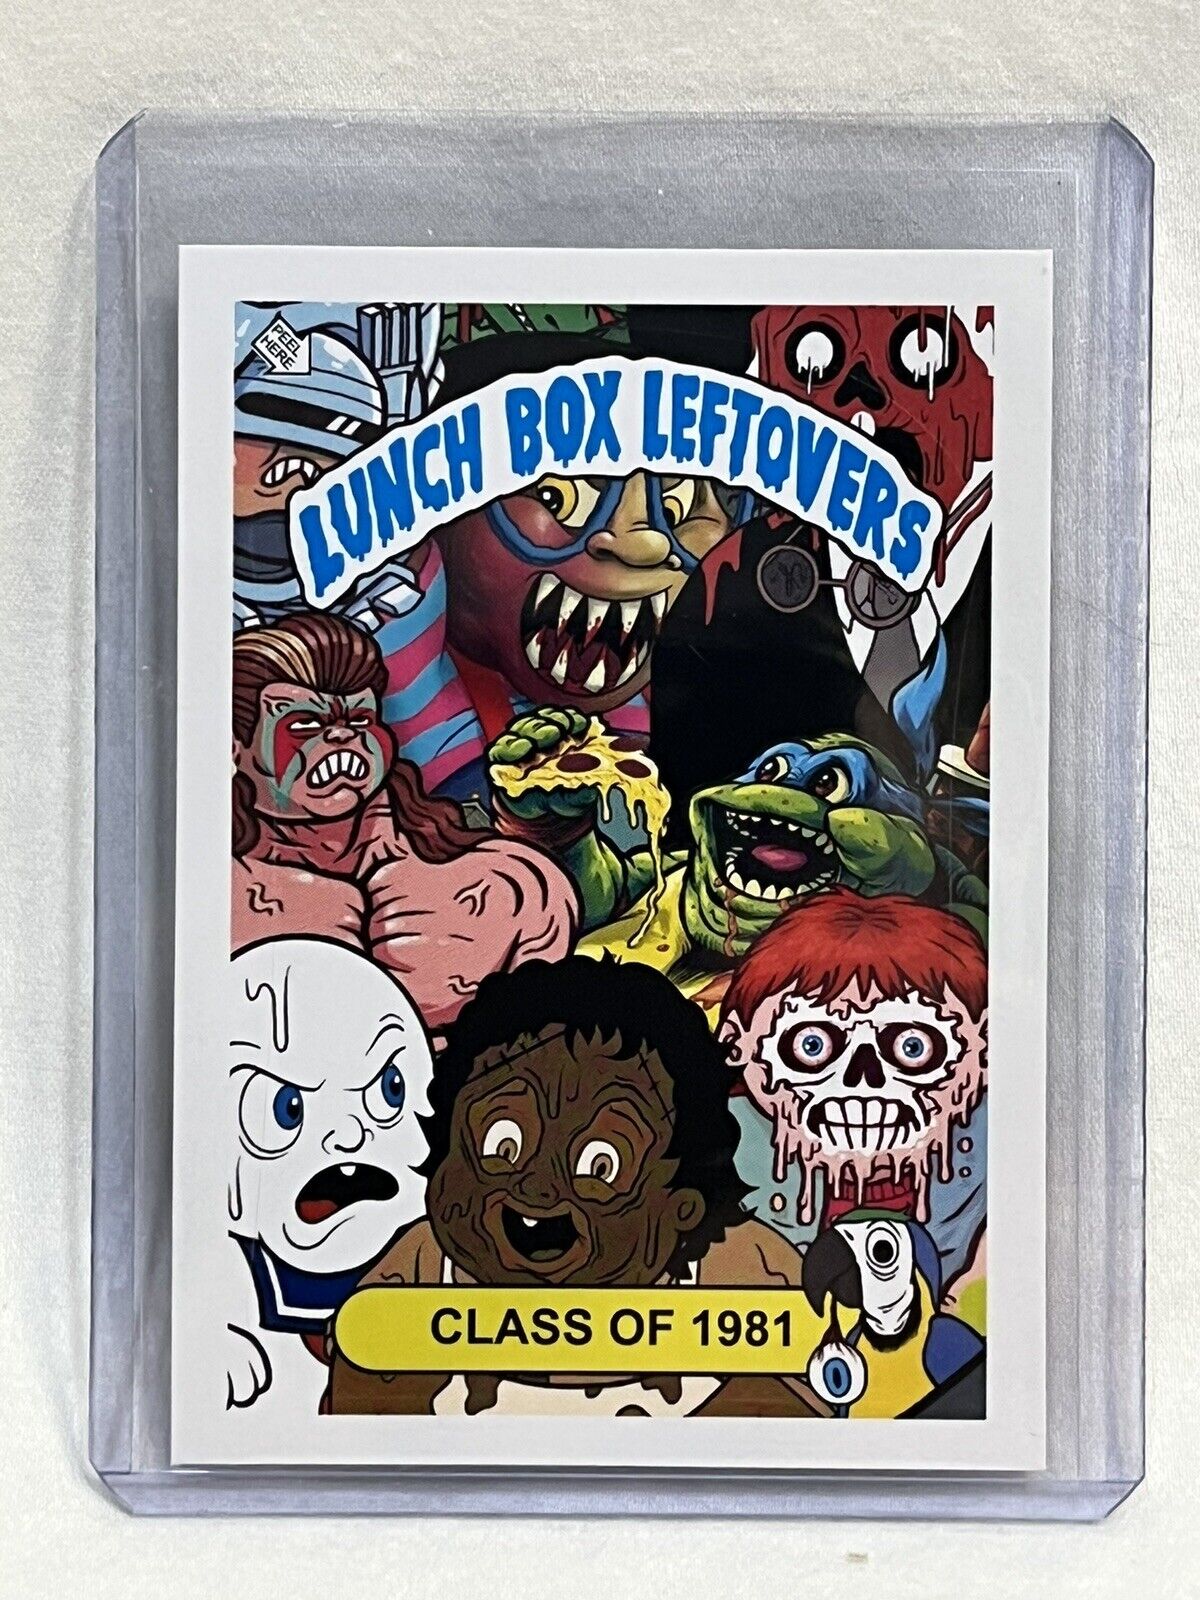 Rare SSFC Series 4 Lunch Box Leftovers Class of 1981 Insert / Chase Card